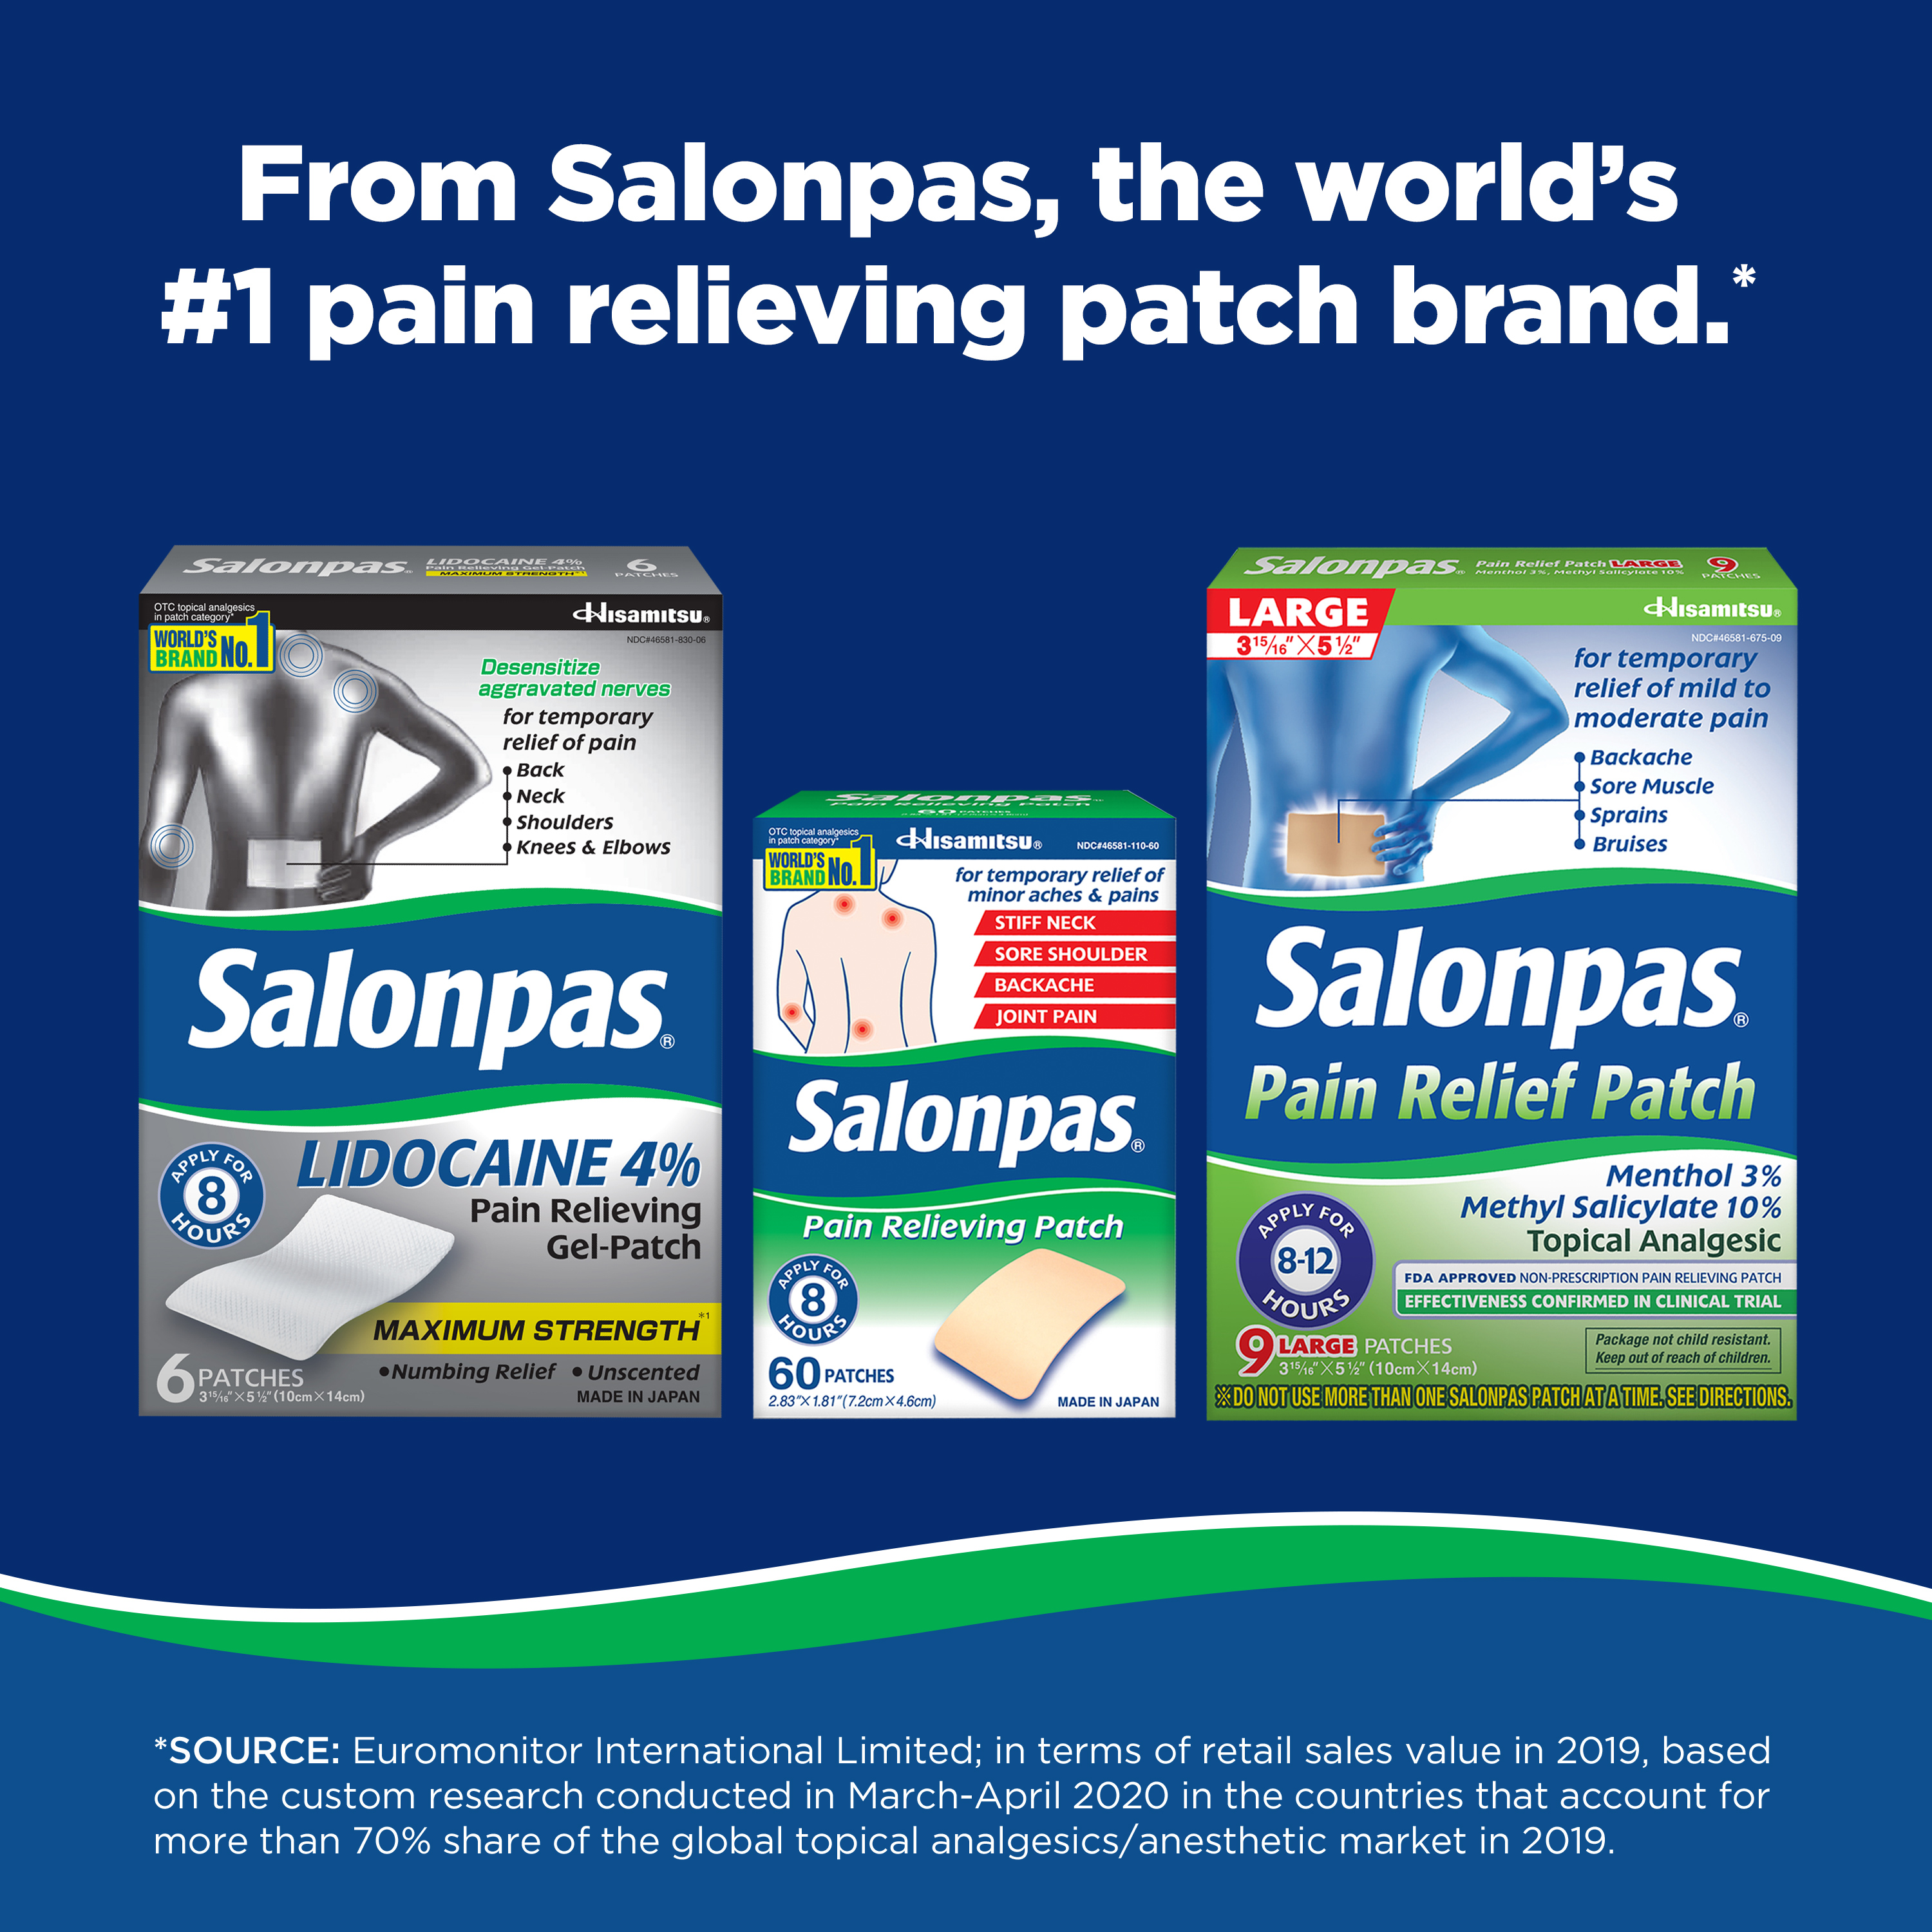 Salonpas Pain Relieving Patch, 60 count - image 5 of 9